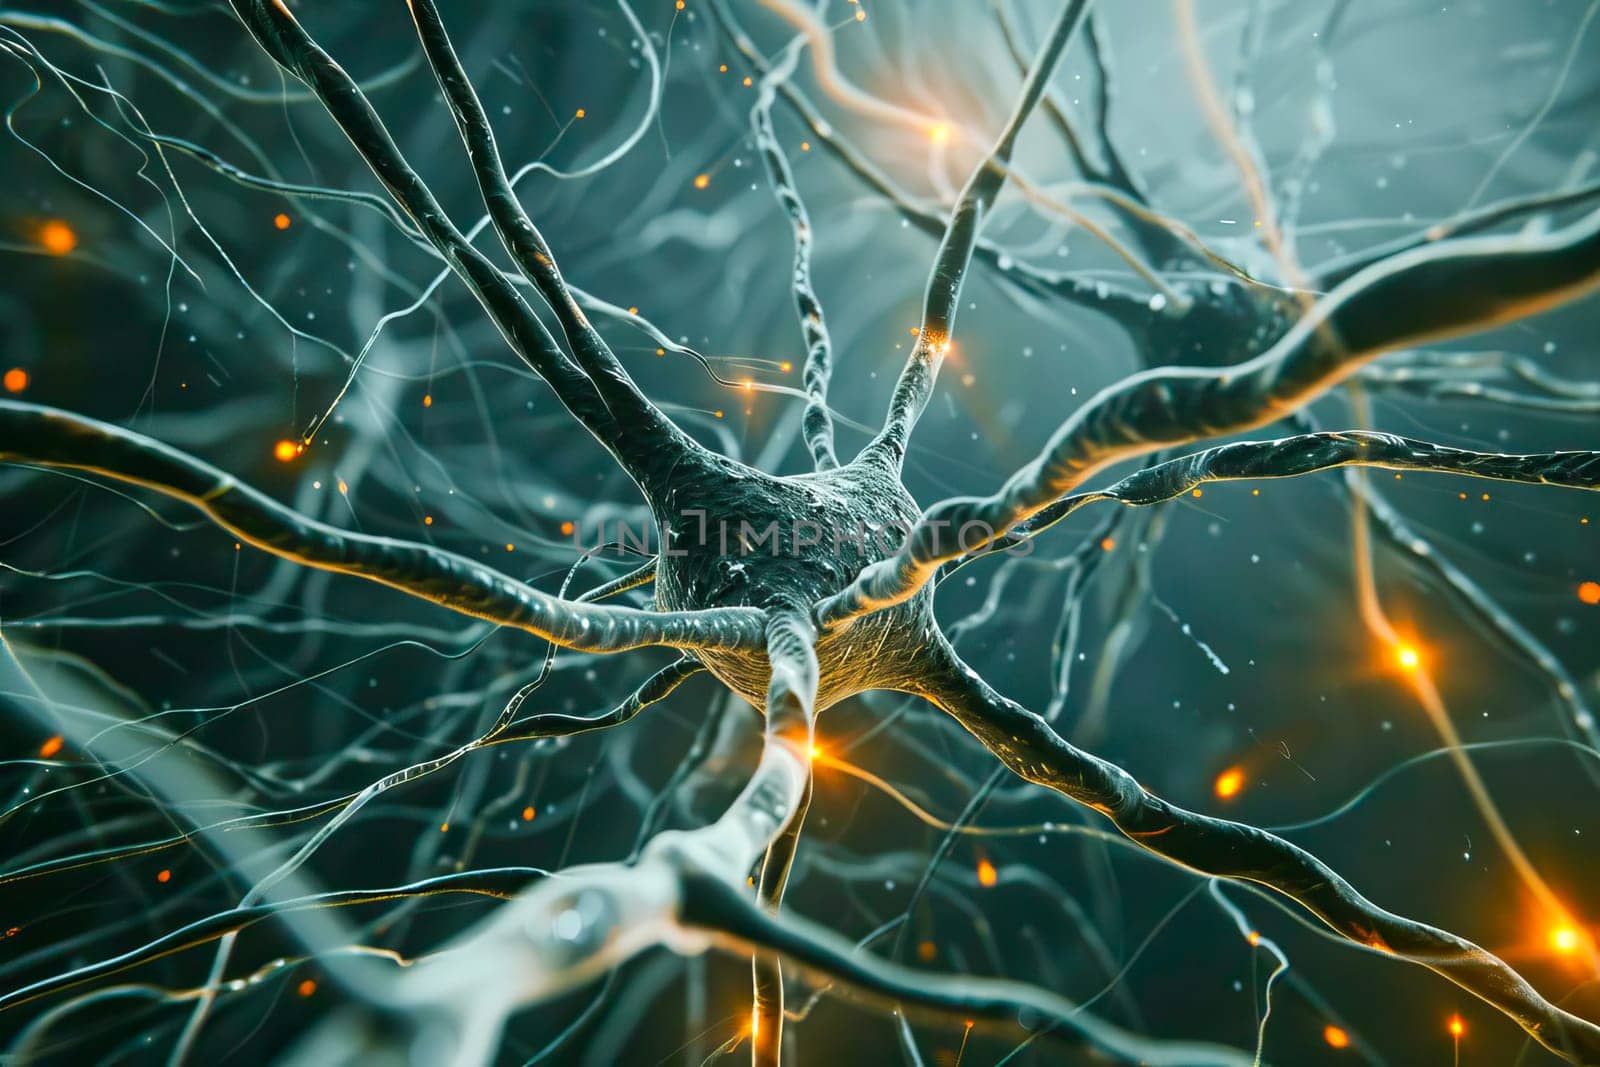 Neurons in the brain connect and fire, showcasing the complexity of human neurology.